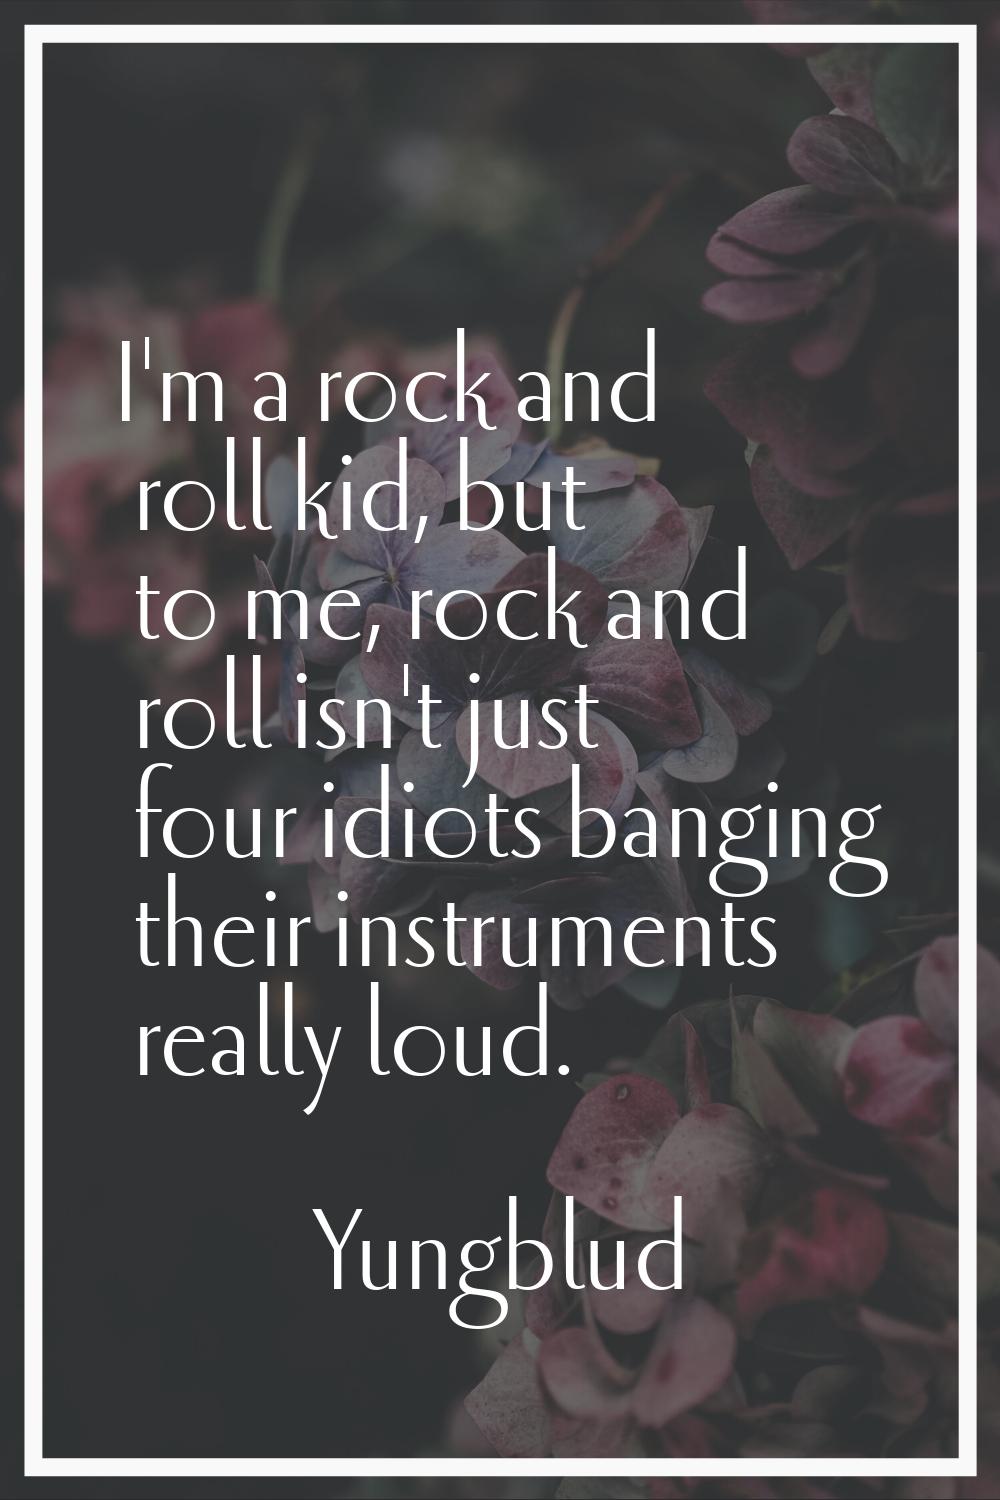 I'm a rock and roll kid, but to me, rock and roll isn't just four idiots banging their instruments 